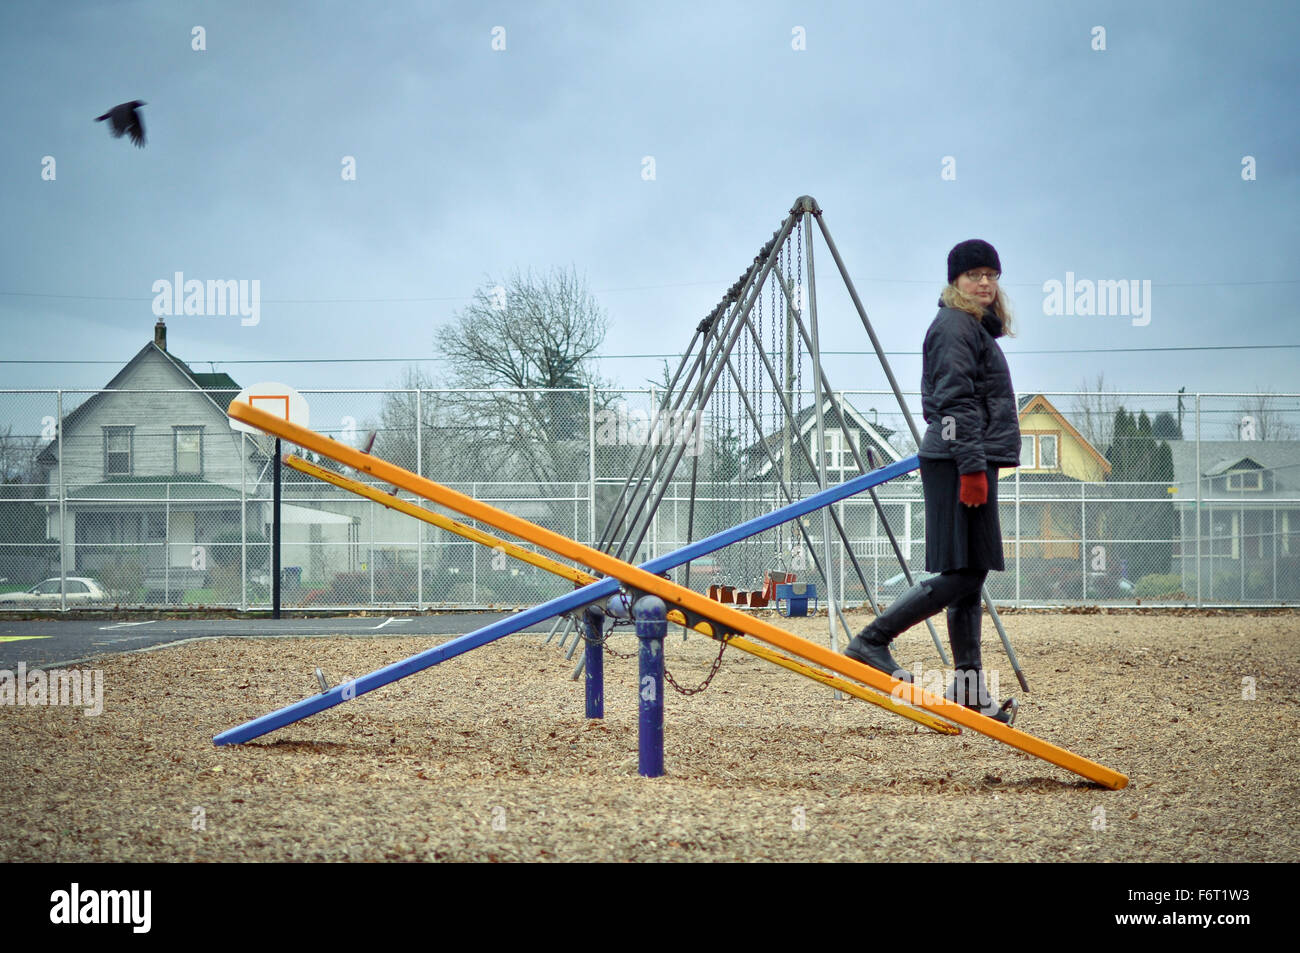 Caucasian woman walking on playground seesaw Banque D'Images